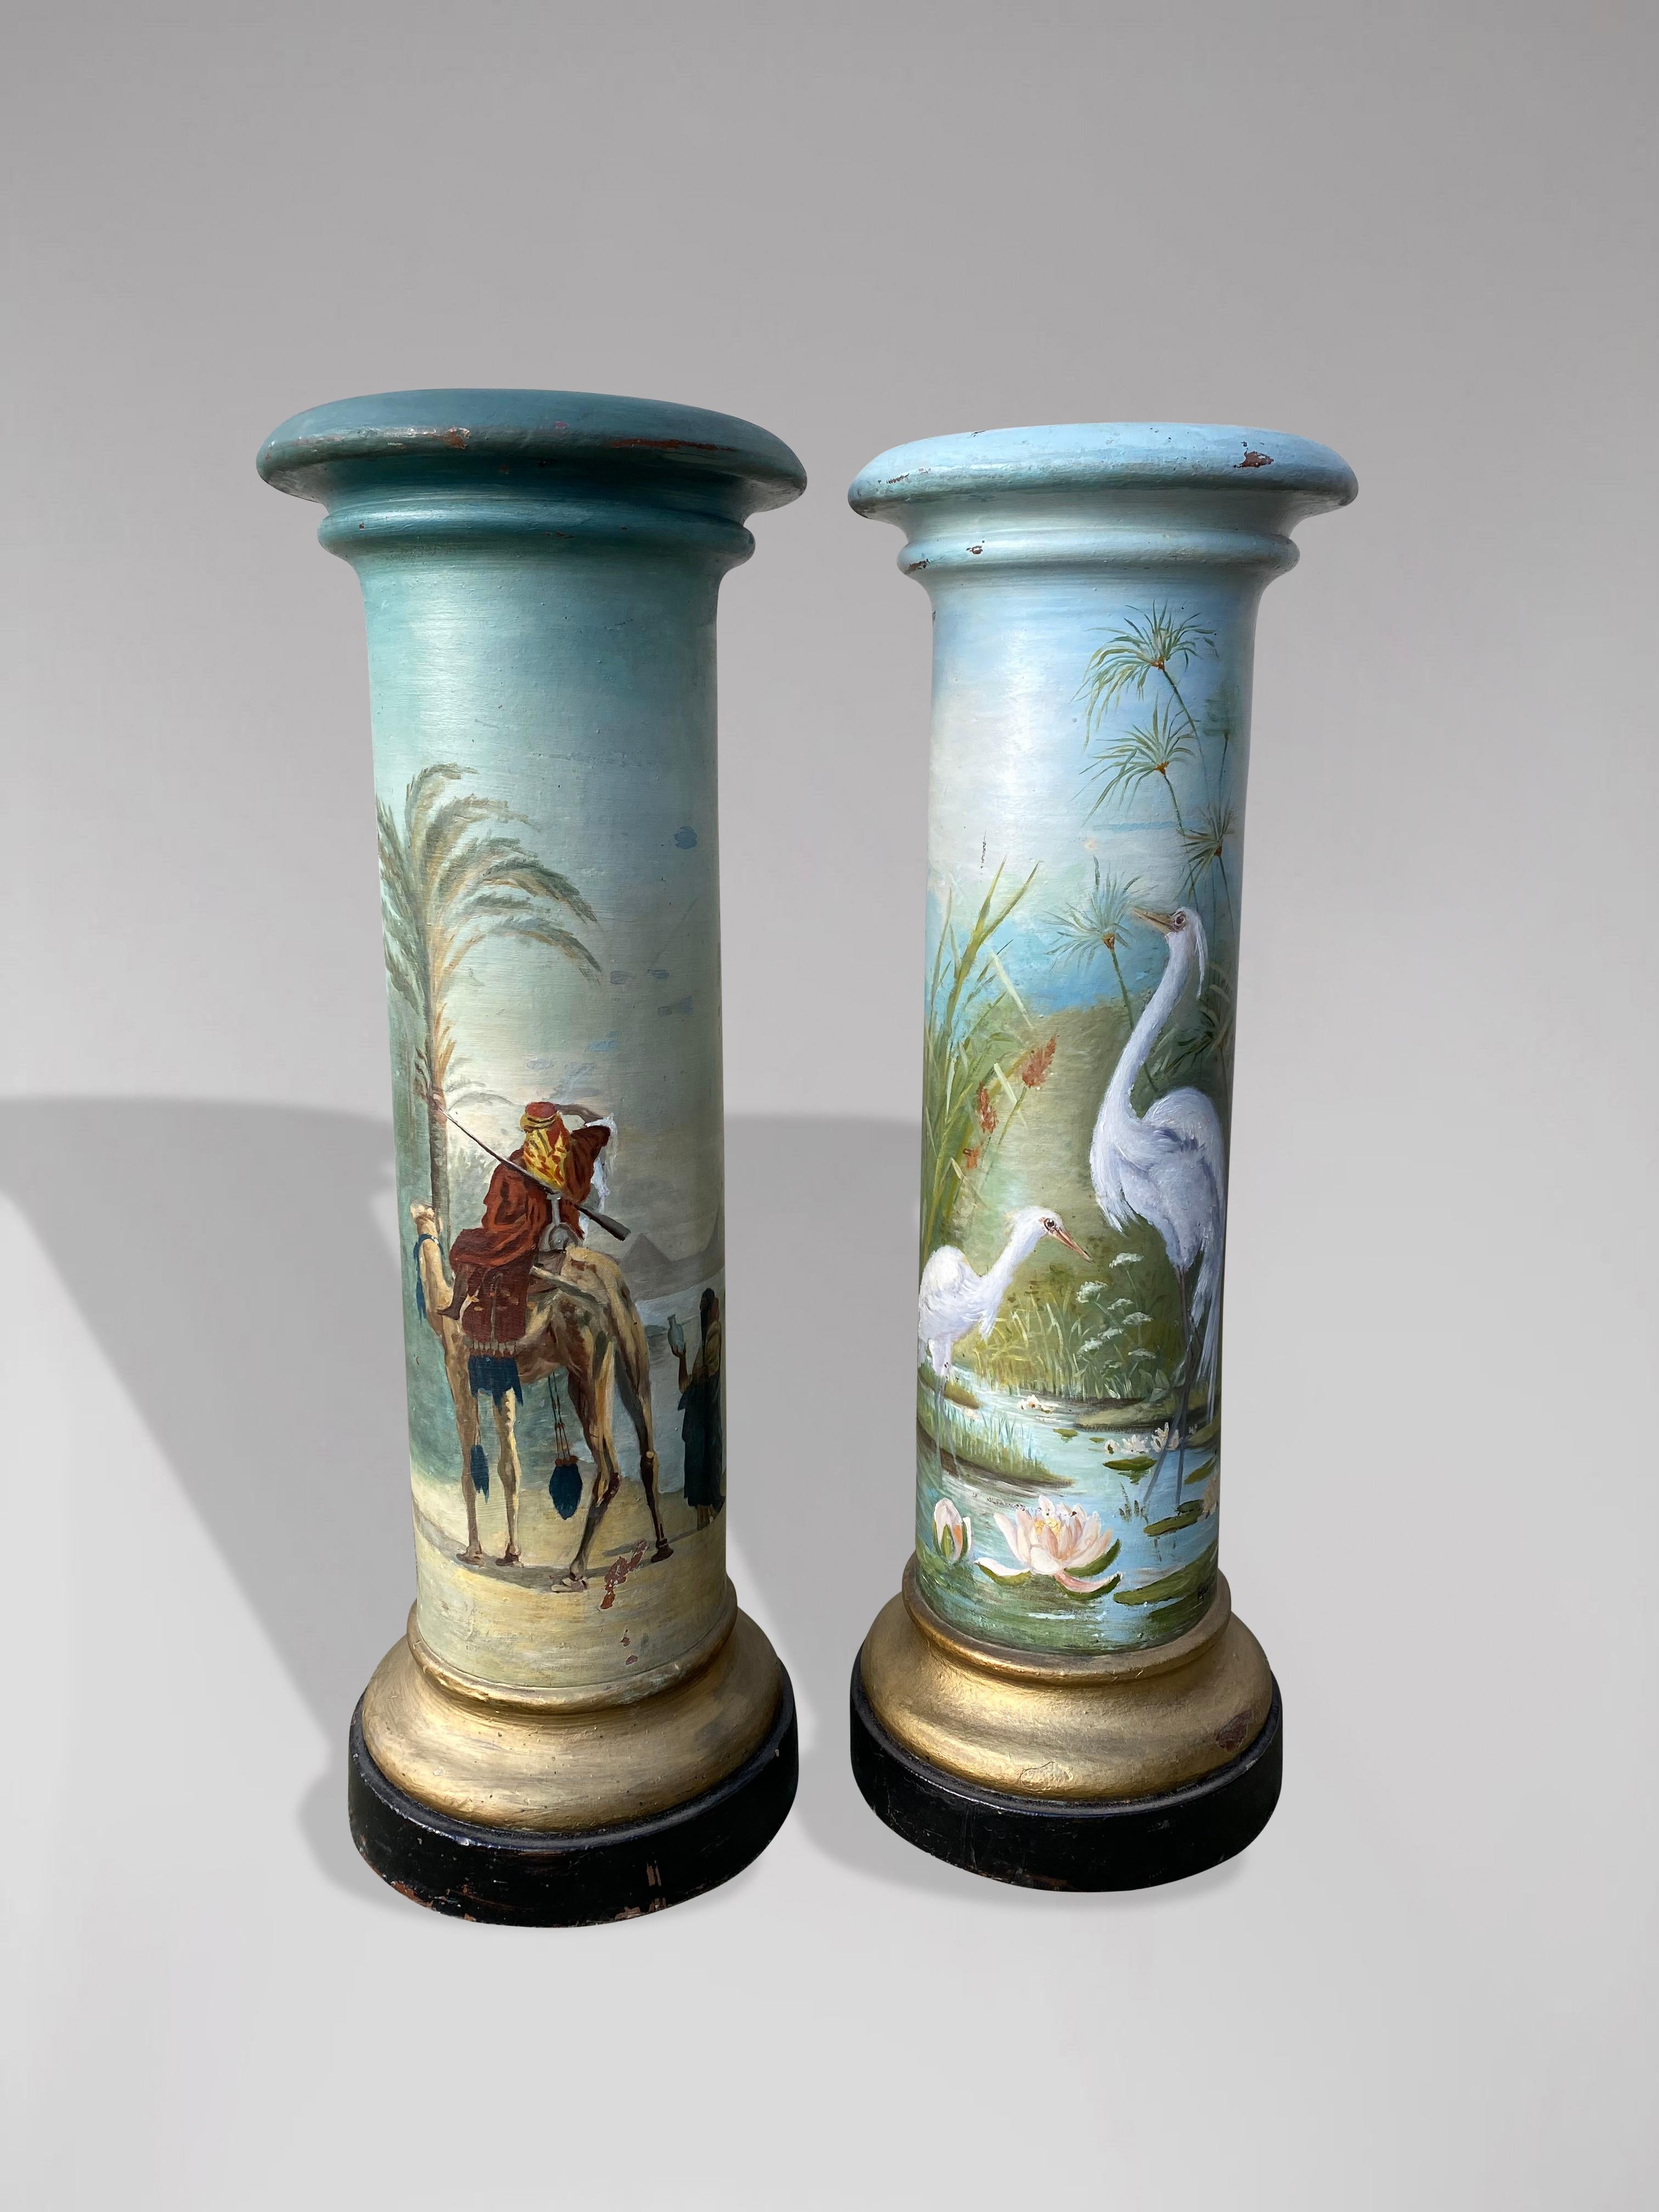 A stunning pair of columns or a pair of terracotta stands painted with an oriental scene on one and a Japanese scene with two cranes in a pond and water lilies on the other. French work, late 19th-early 20th centuries. These decorative columns were